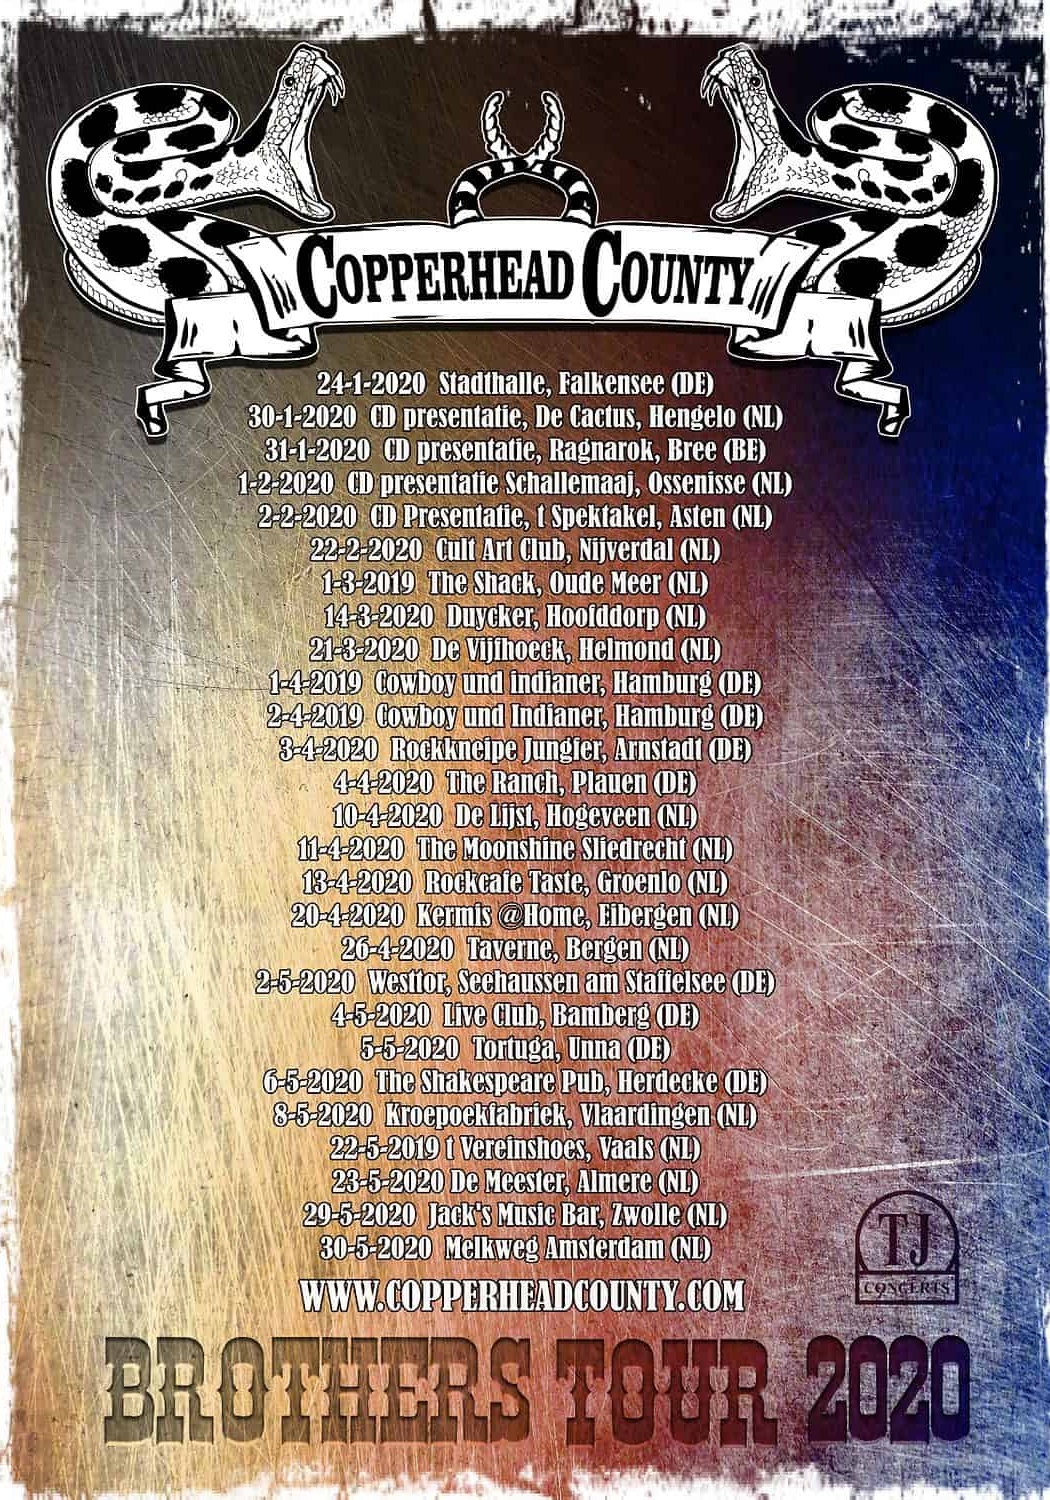 copperhead county brothers 2020